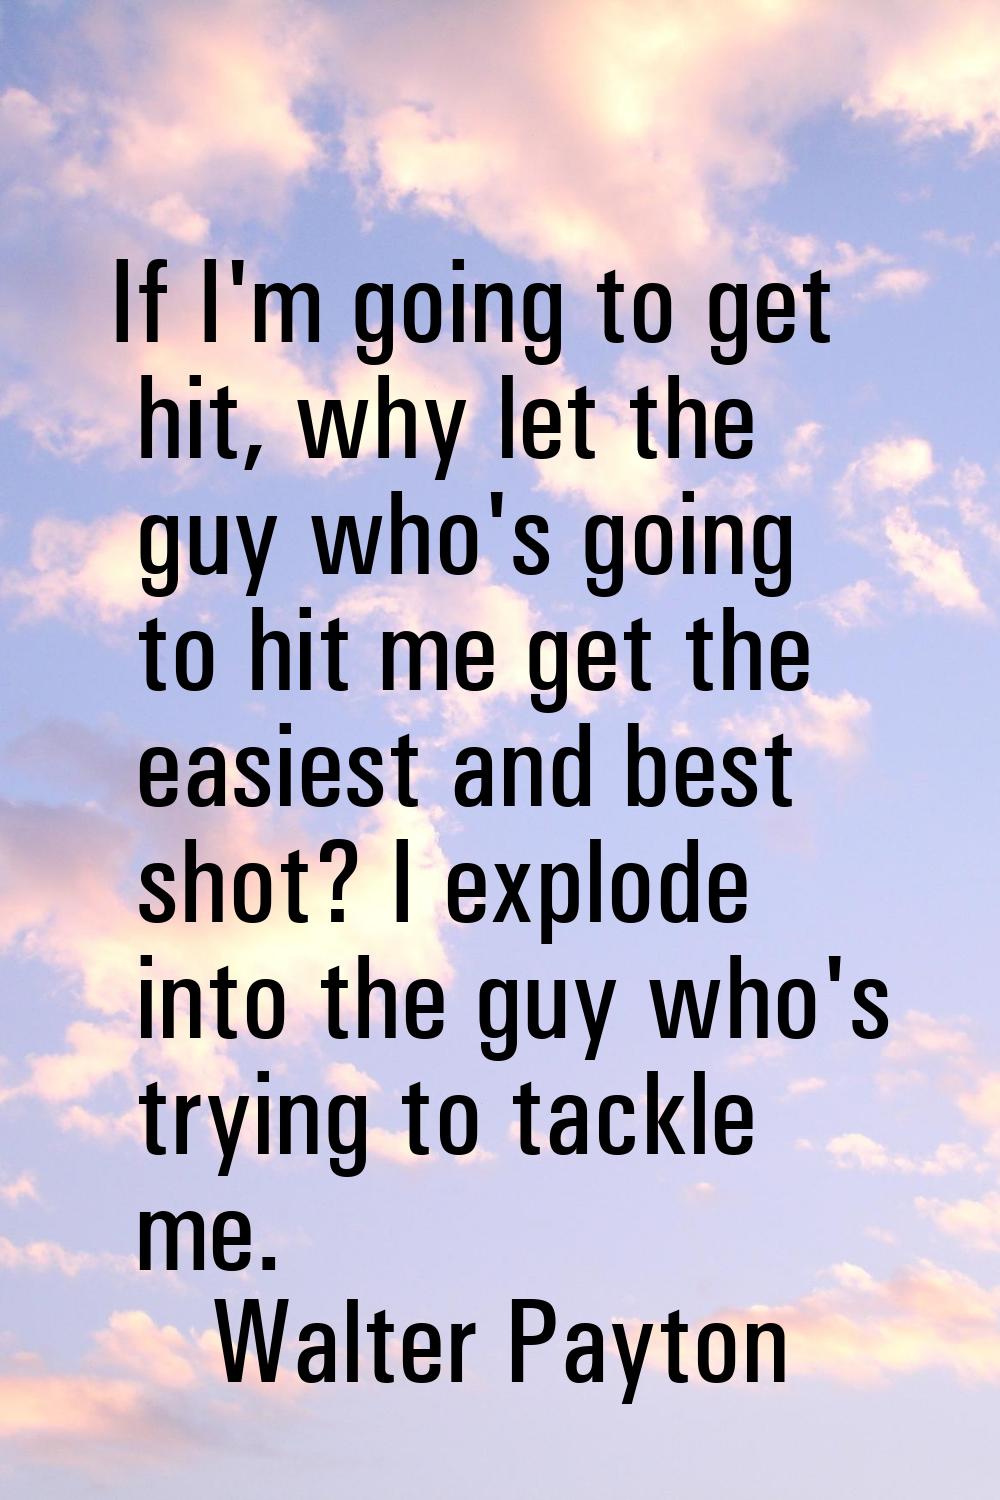 If I'm going to get hit, why let the guy who's going to hit me get the easiest and best shot? I exp